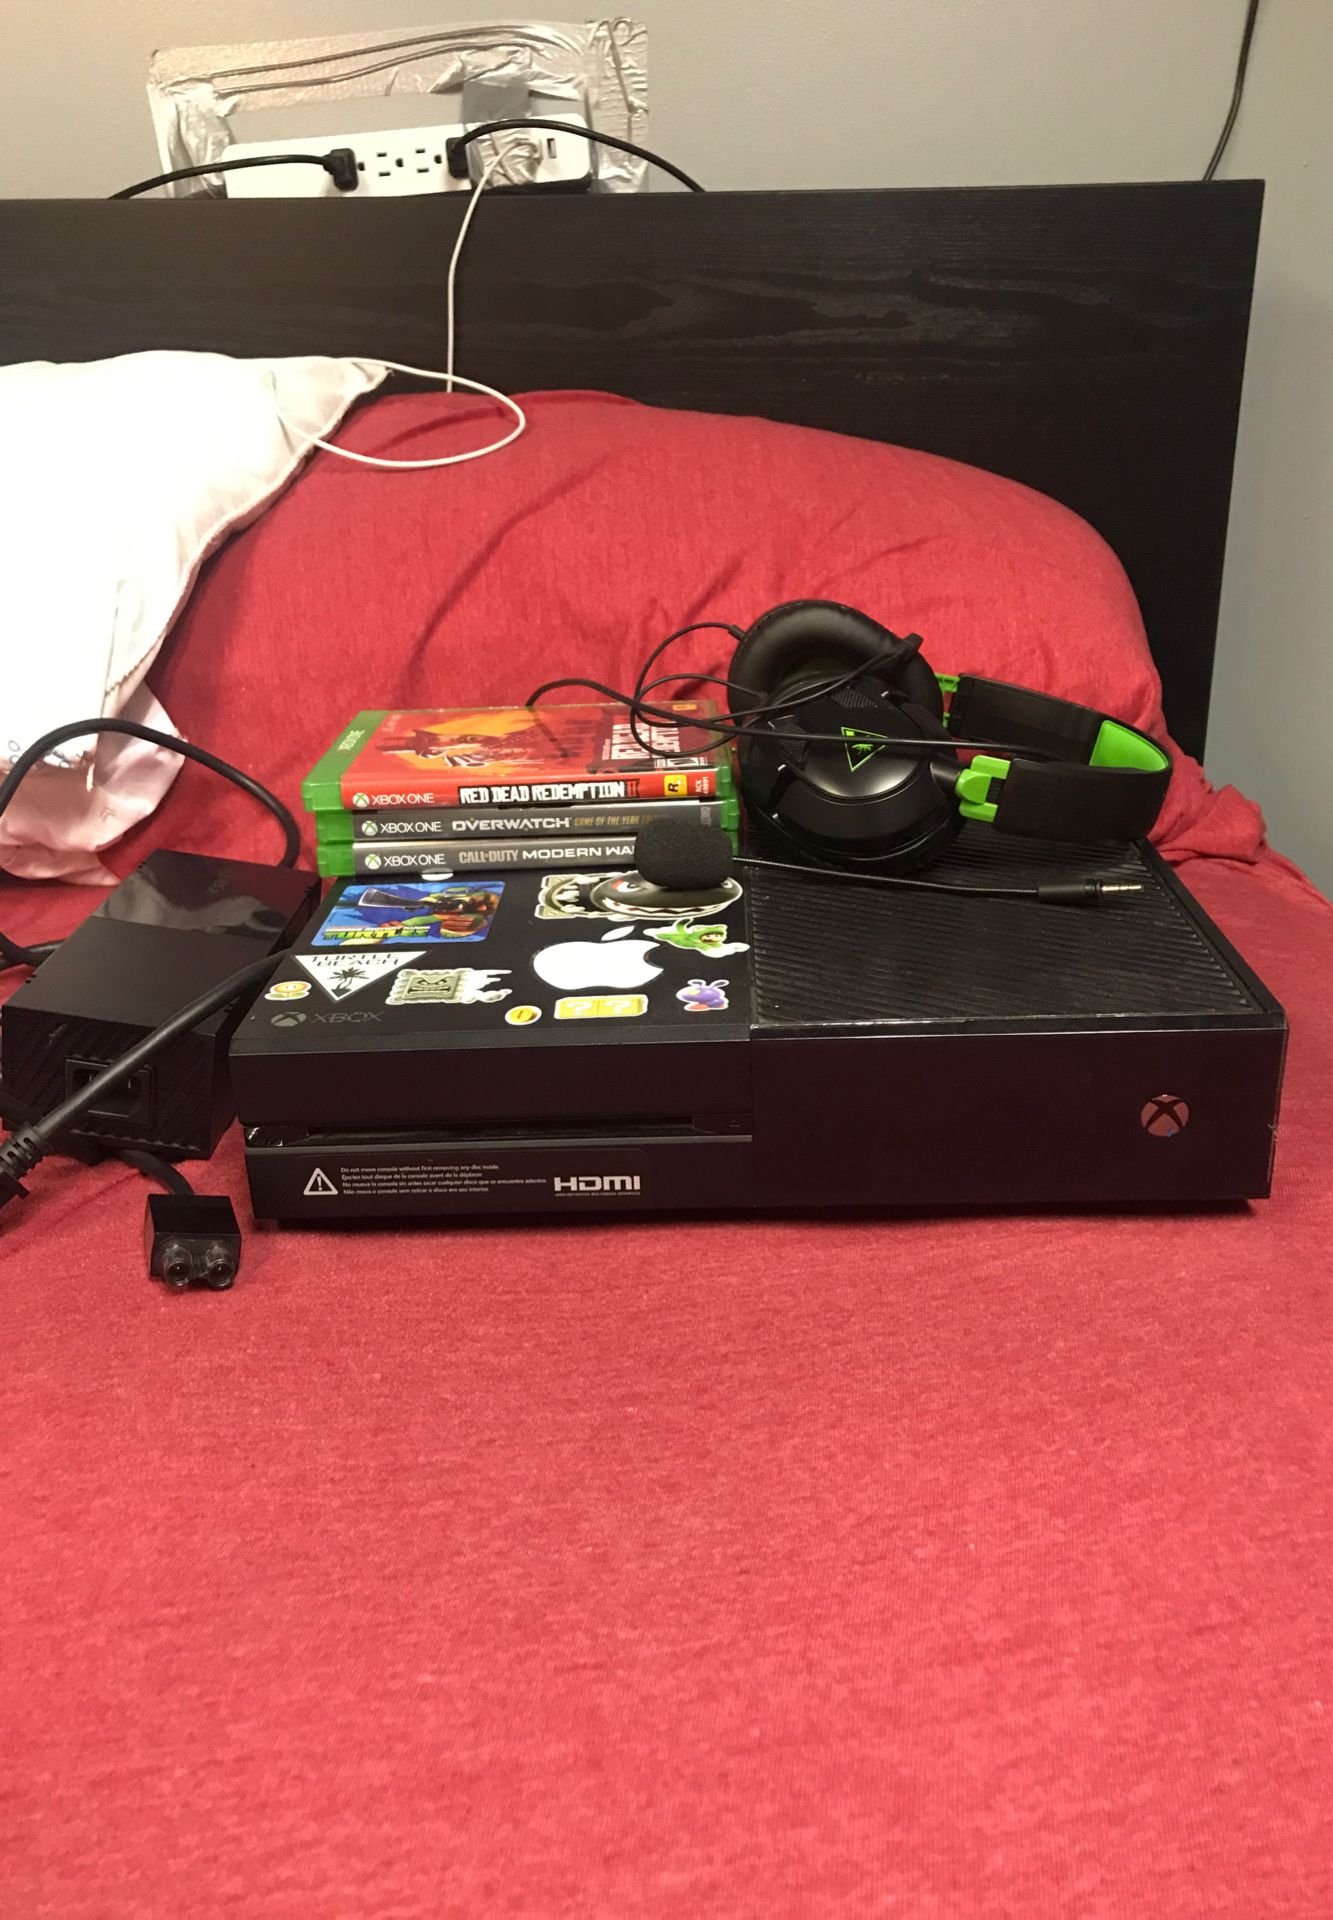 Xbox one console with Turtle beach headset and games